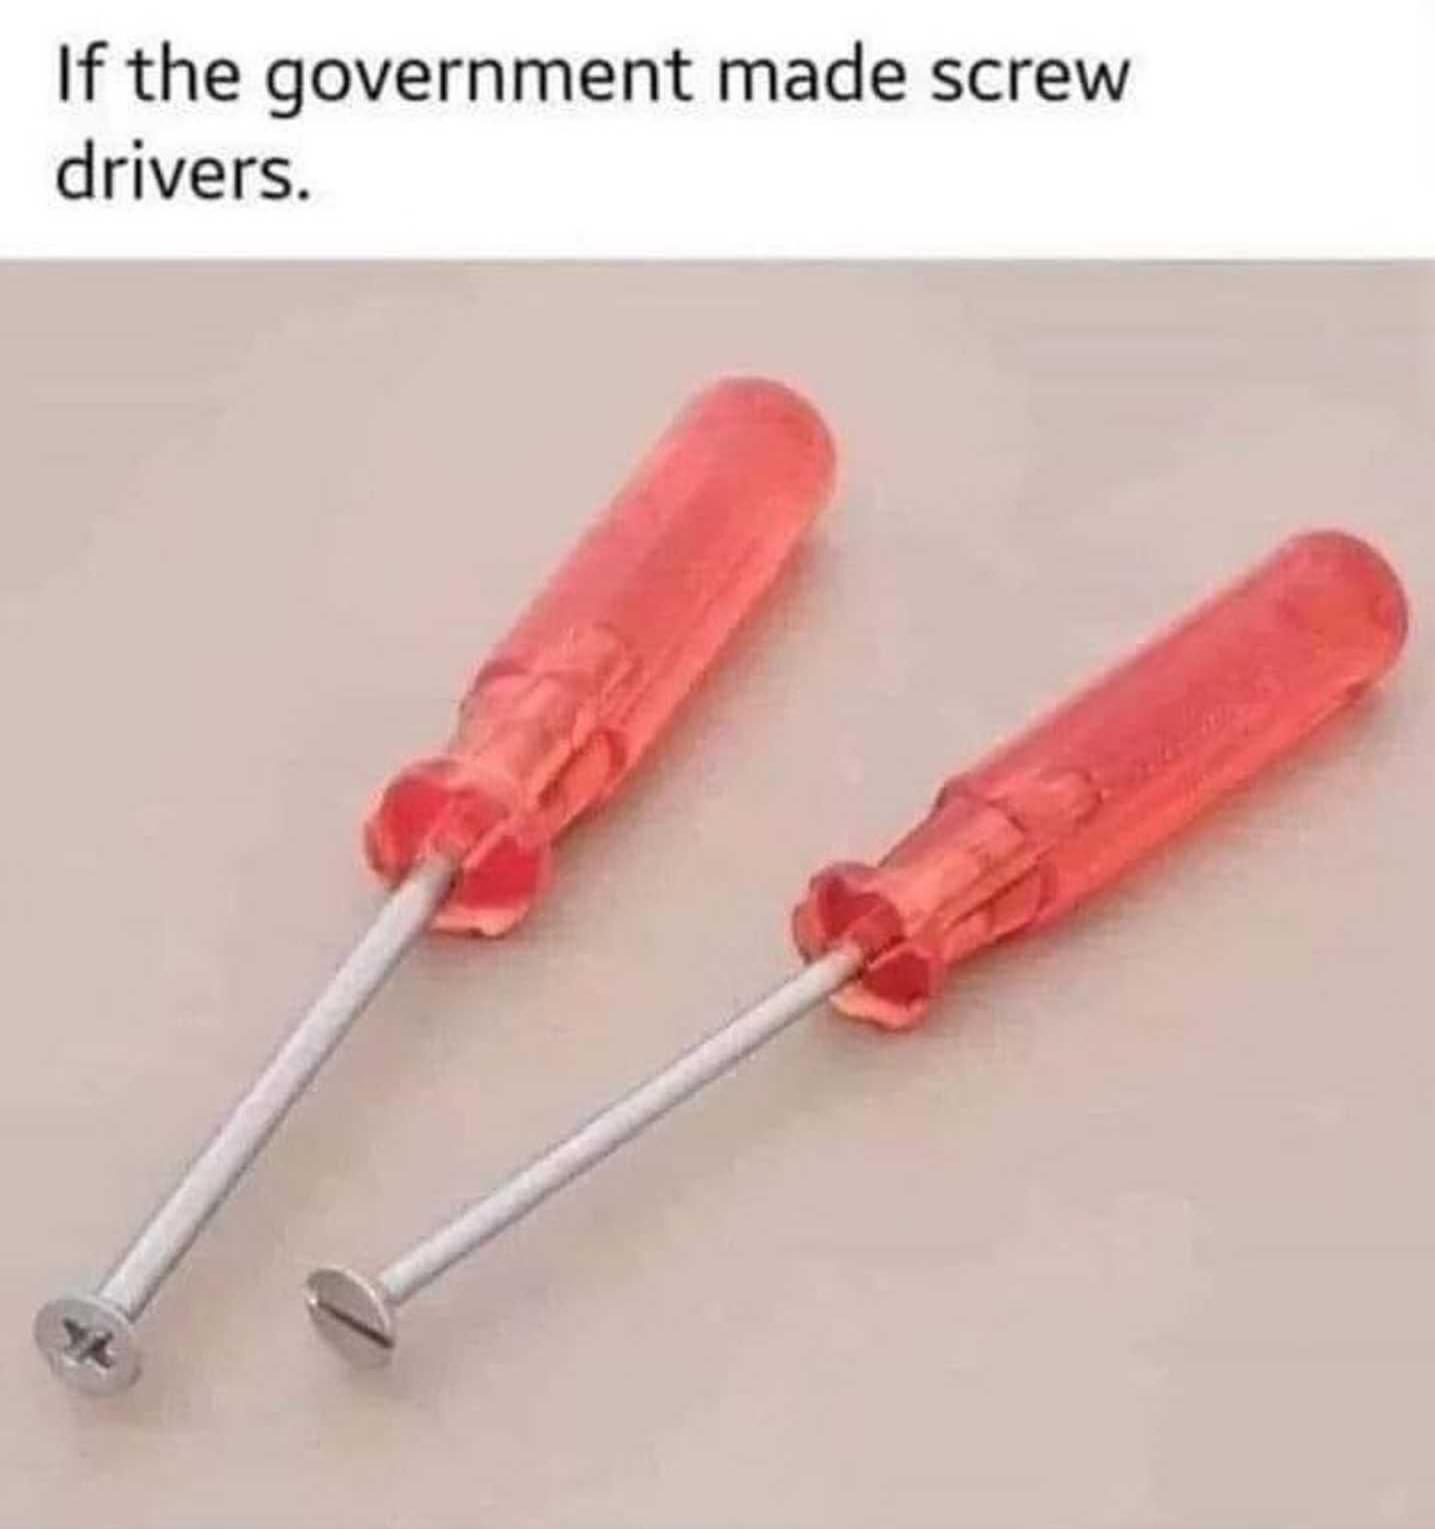 Government Issued Tools...